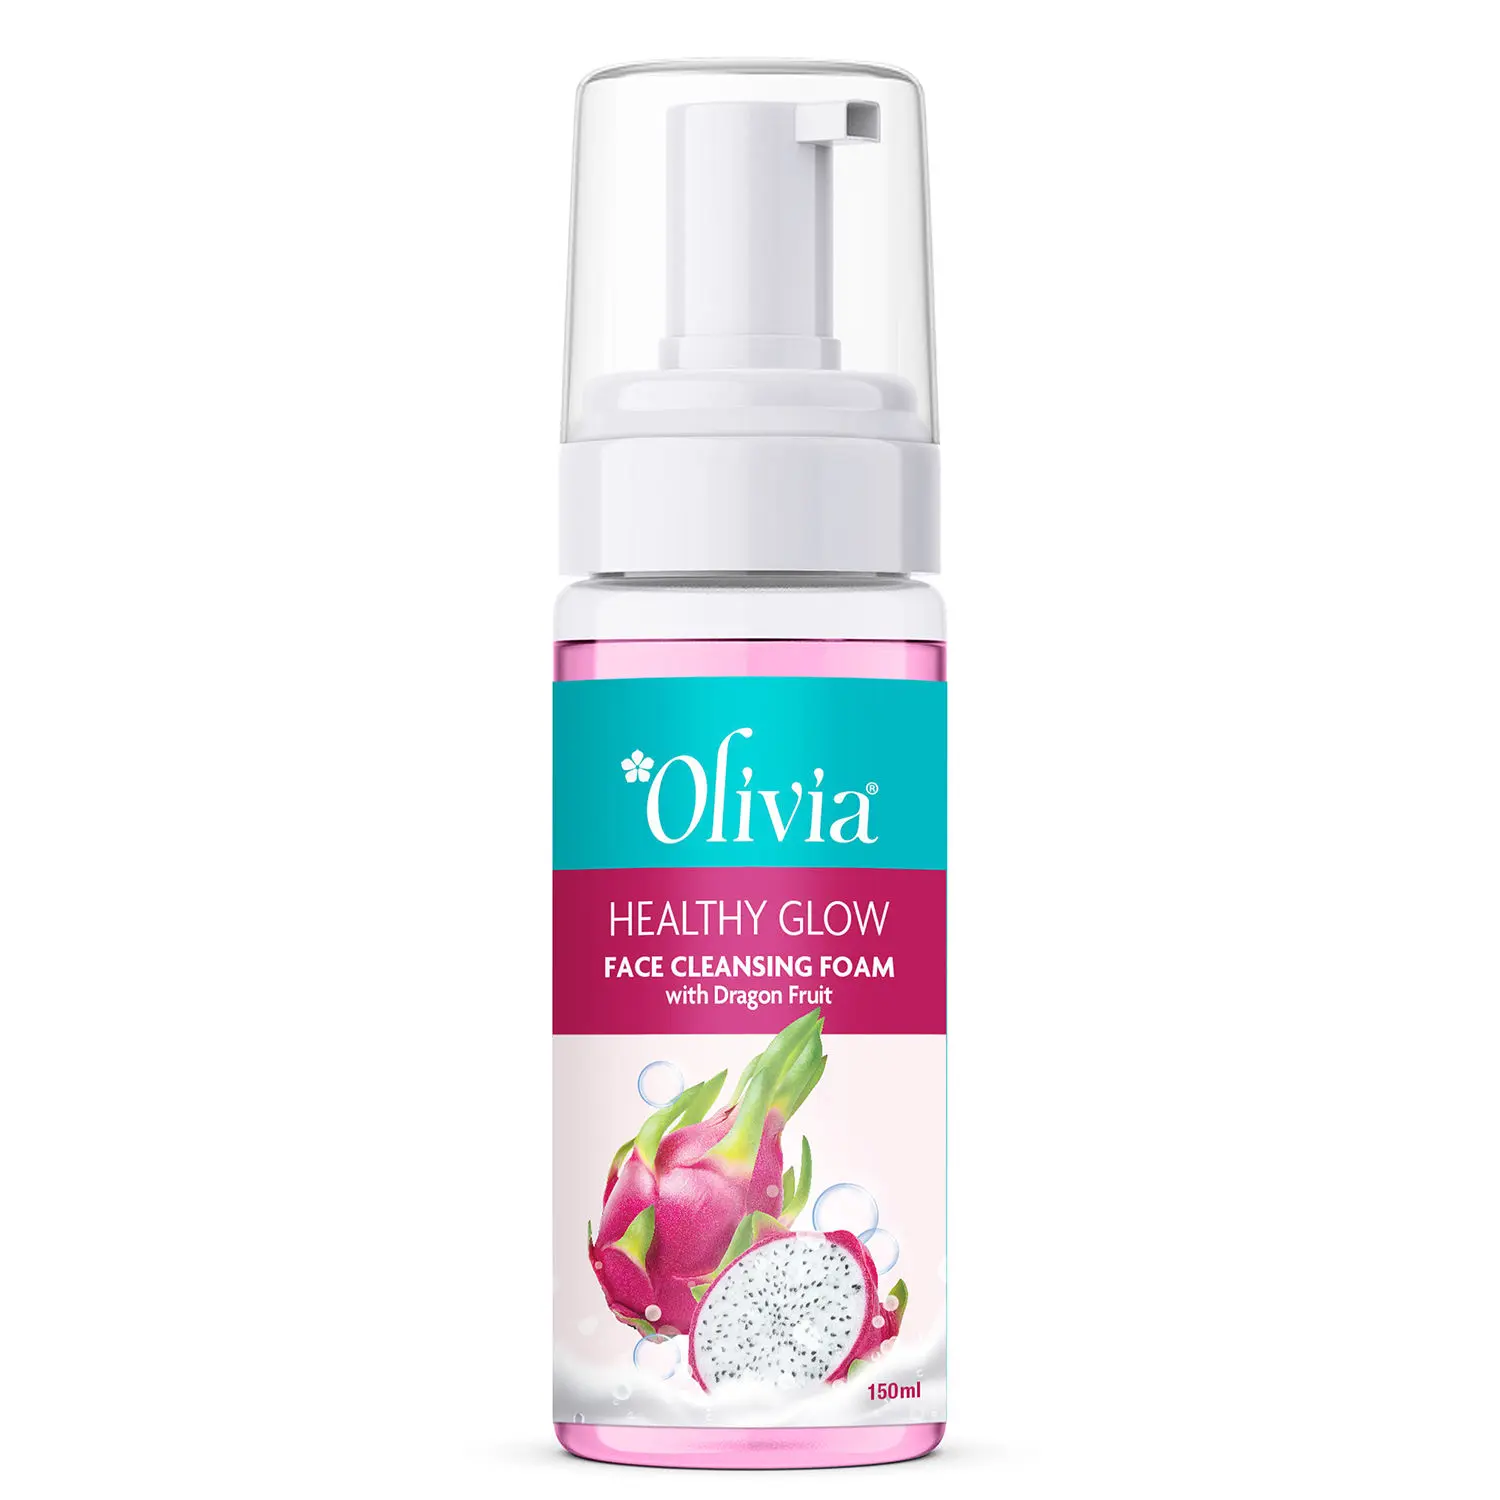 Olivia Clarifying Face Cleansing Foam with Dragon Fruit - 150ml - Pore Cleanser, Anti-aging Face Wash, Prevents Acne & Blemishes, Youthful Skin Glow, Promotes Healthier Skin